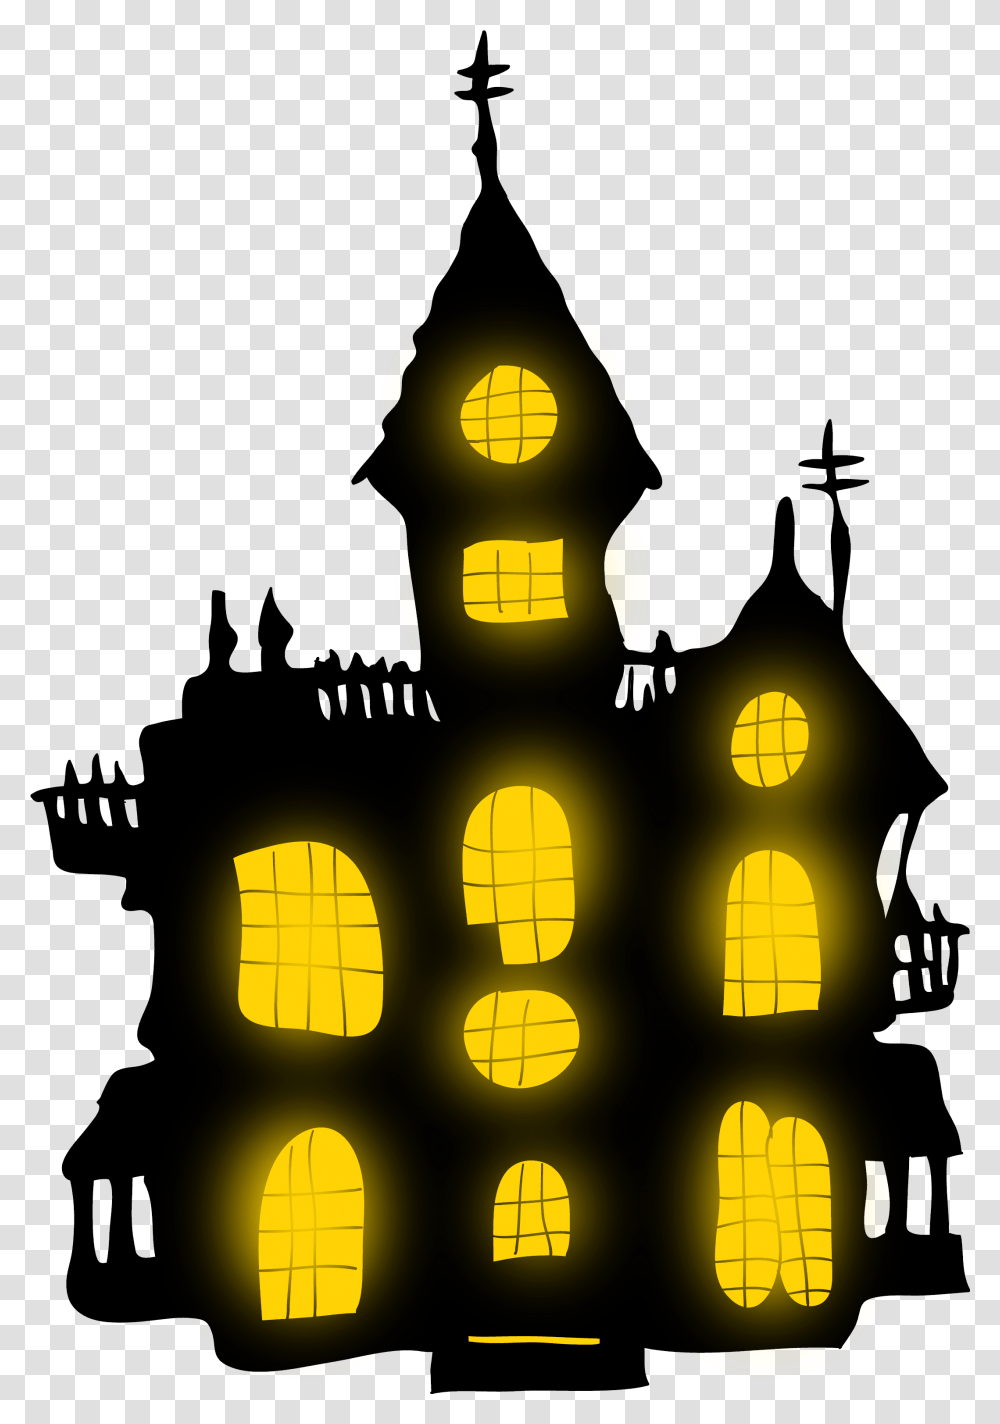 Library Of Halloween Castle Clip Art Stock, Building, Architecture, Urban, Text Transparent Png